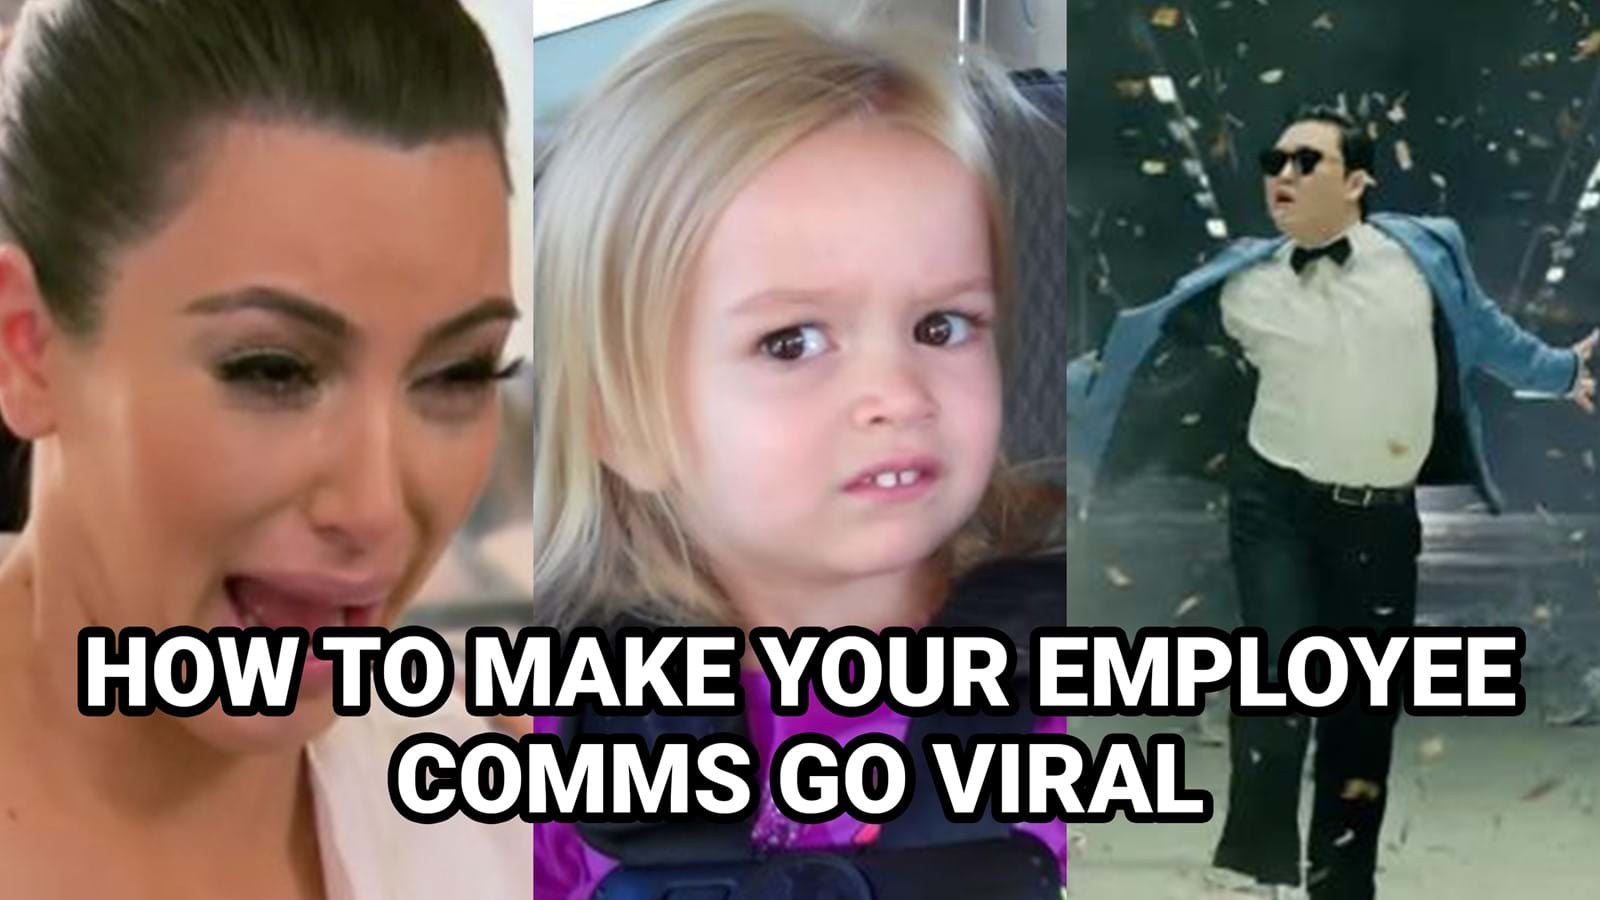 'How to make your employee comms go viral' feature image